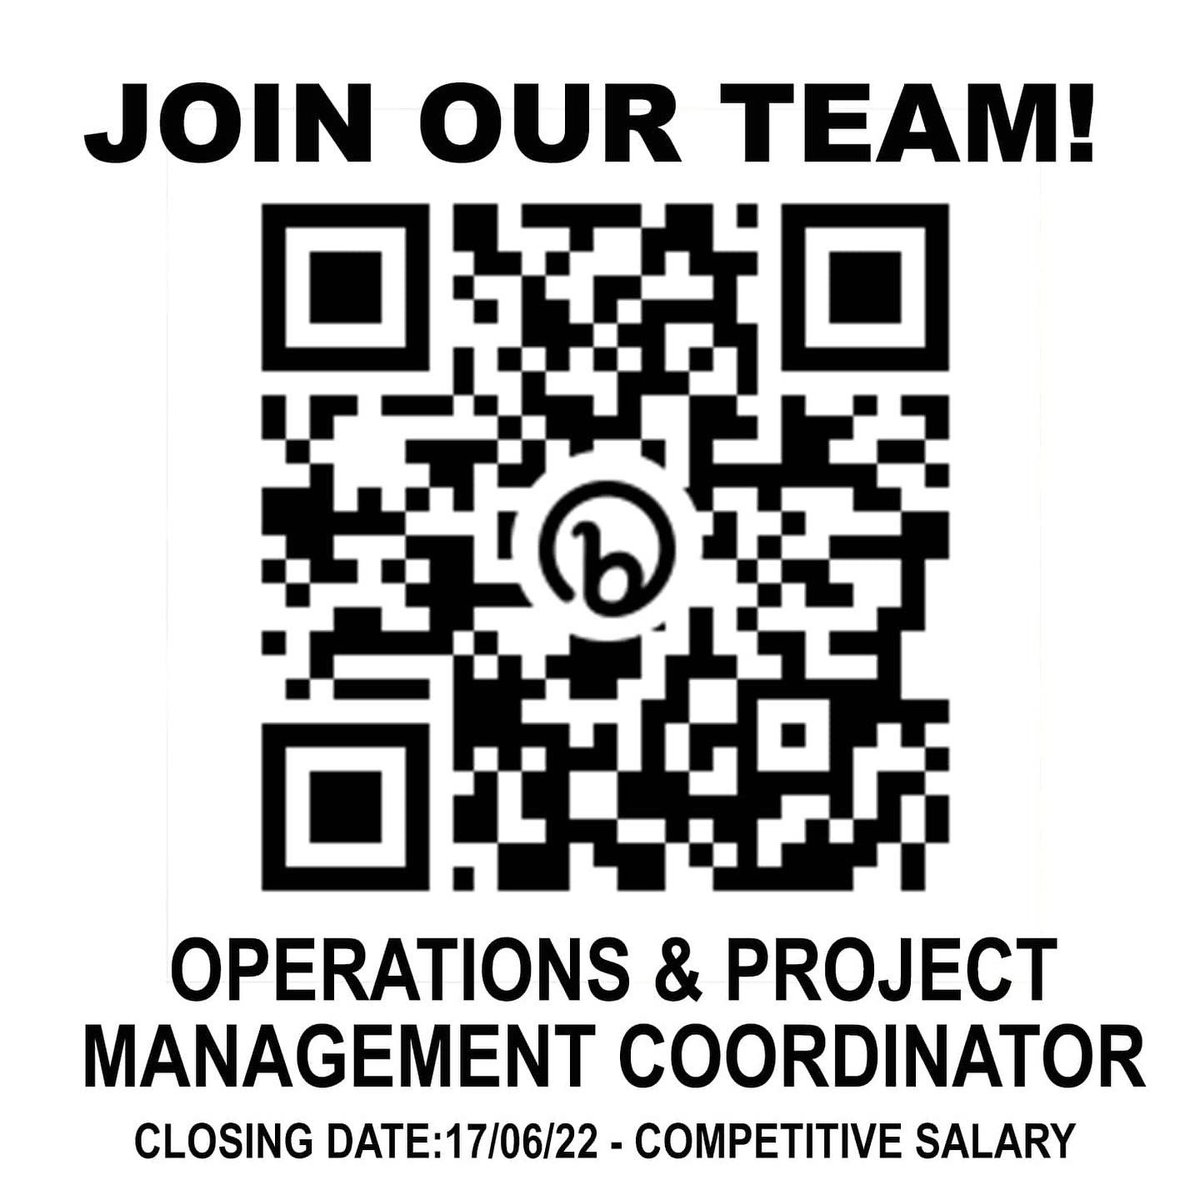 MPG Job Vacancy - Join Our Team! Operations & Project Management Coordinator Competitive Salary Closing Date: Friday 17th June 2022 CLICK QR CODE for more information and please share with anyone you think may be suitable! 🙏